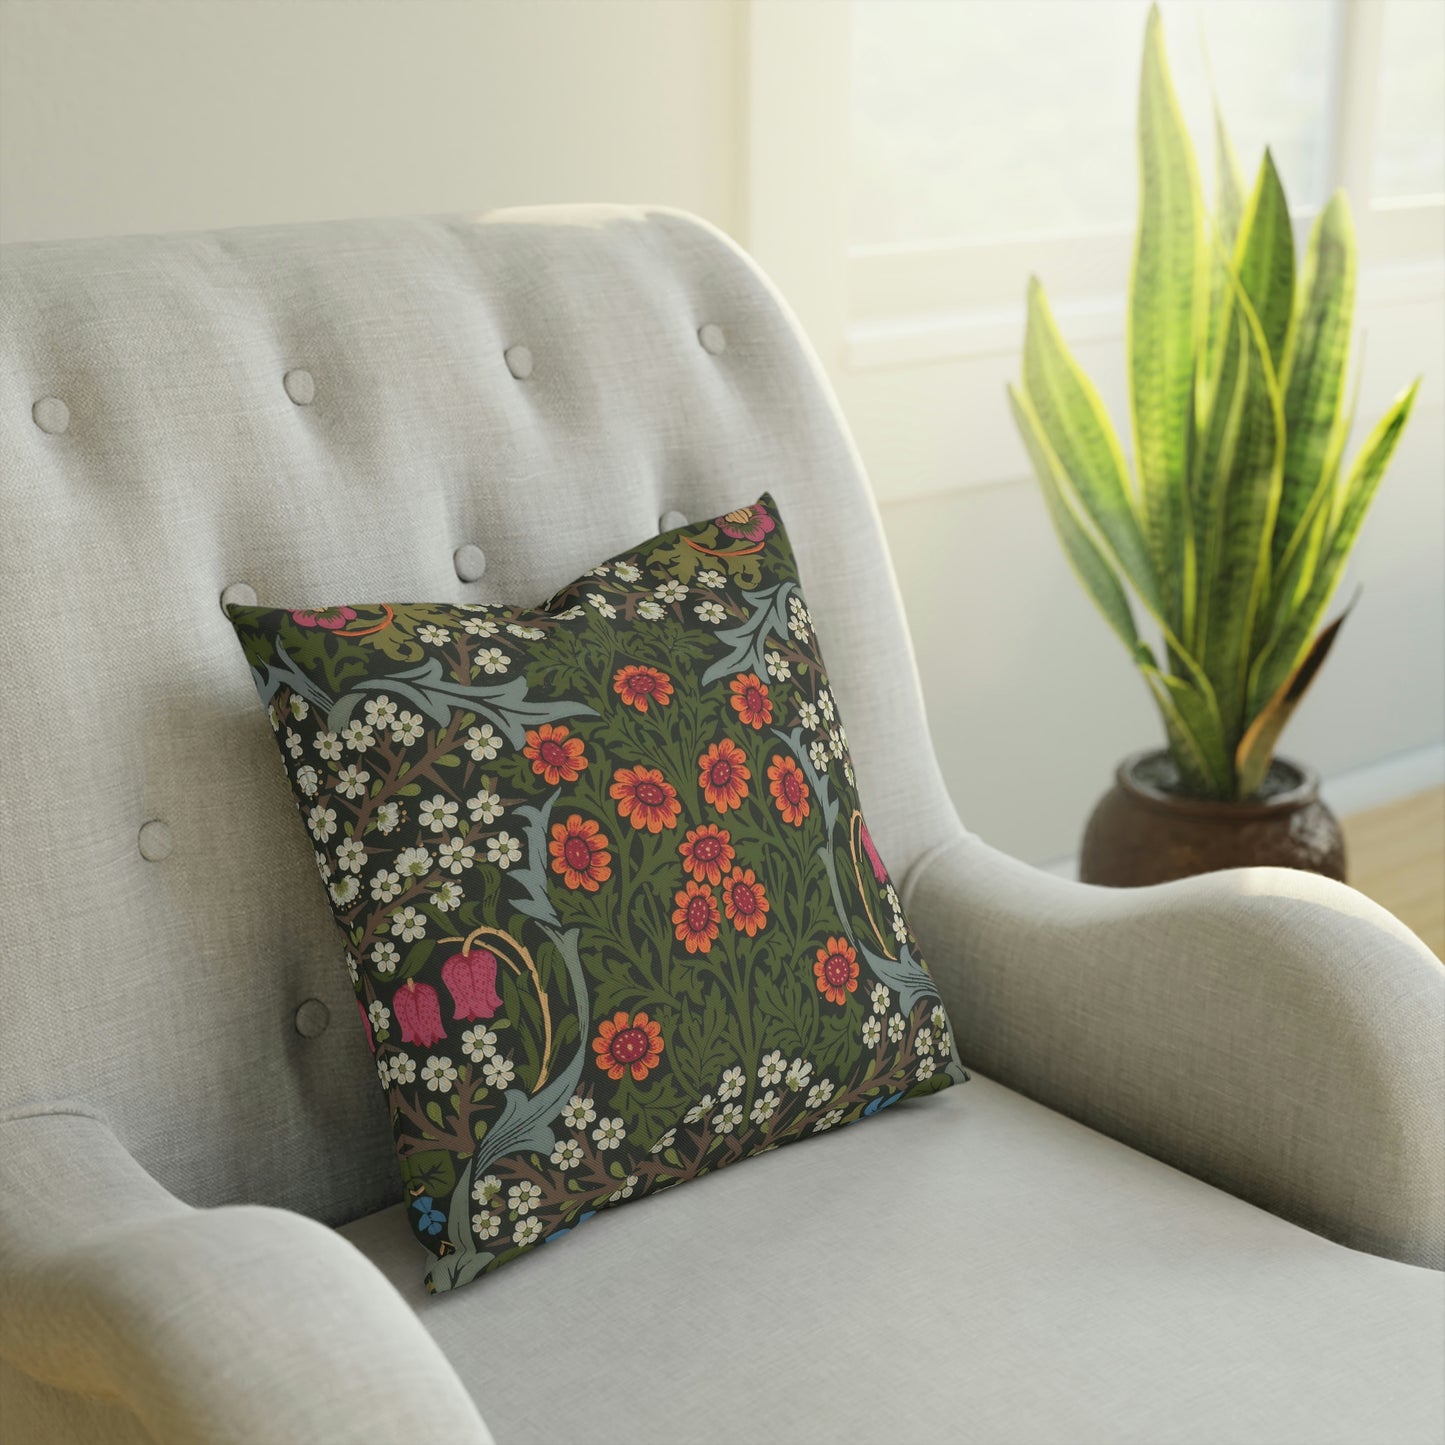 william-morris-cushion-and-cushion-cover-blackthorn-collection-10